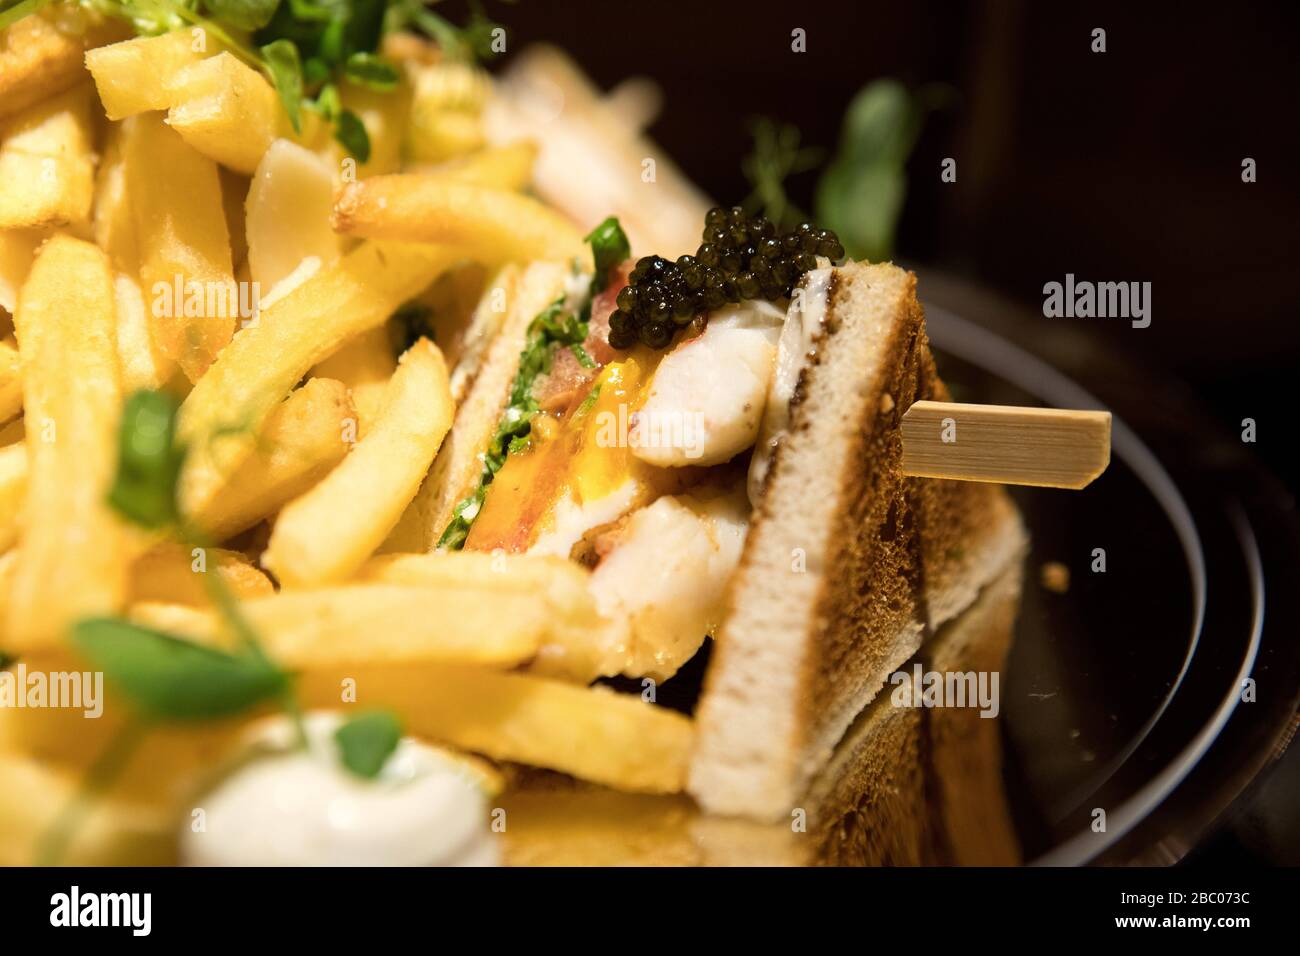 Munich's most expensive club sandwich (with lobster, caviar and truffles) is available at the Jahreszeitenbar in the Hotel 'Vier Jahreszeiten' on Maximilianstraße. [automated translation] Stock Photo